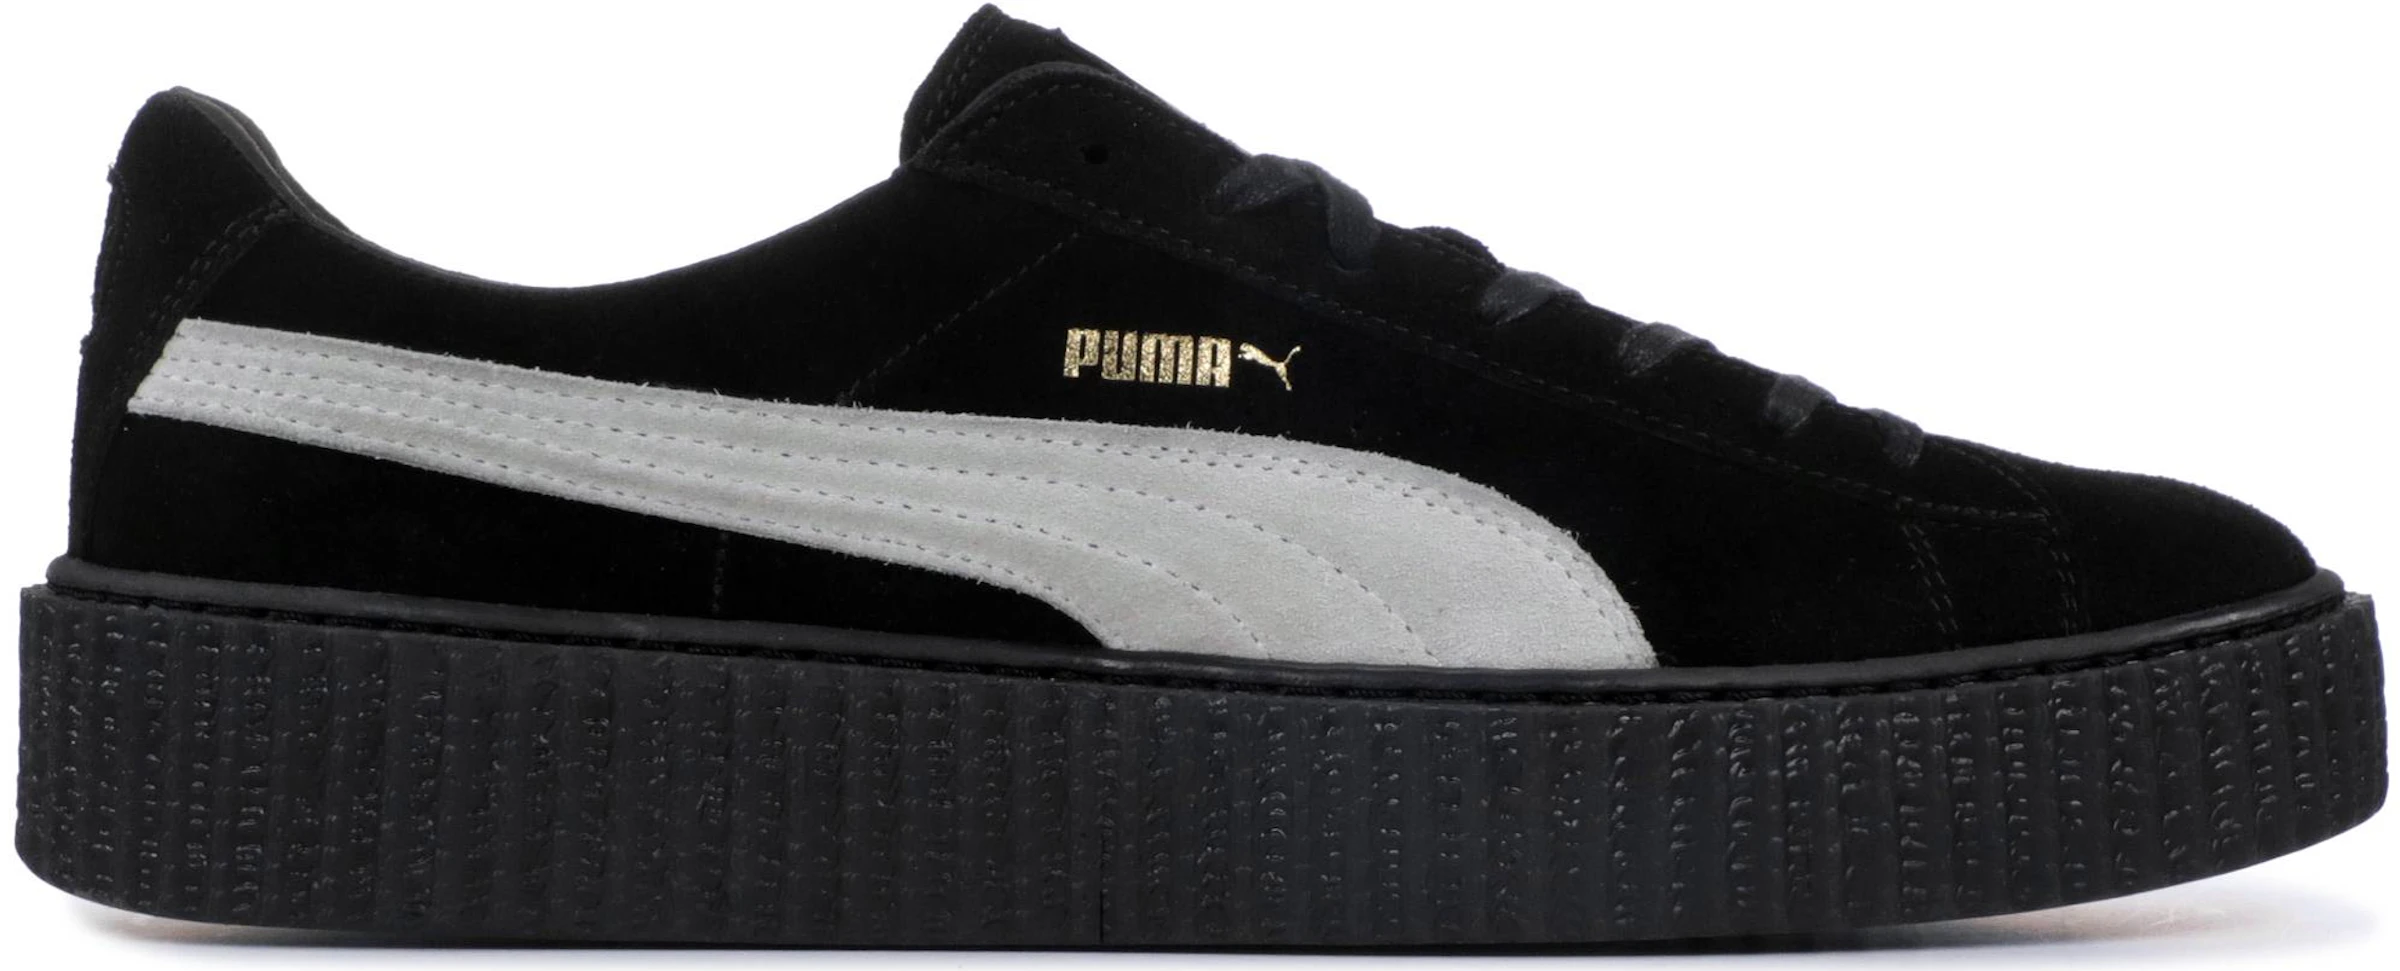 Suede Creepers Fenty Black White - 362178-01 - US